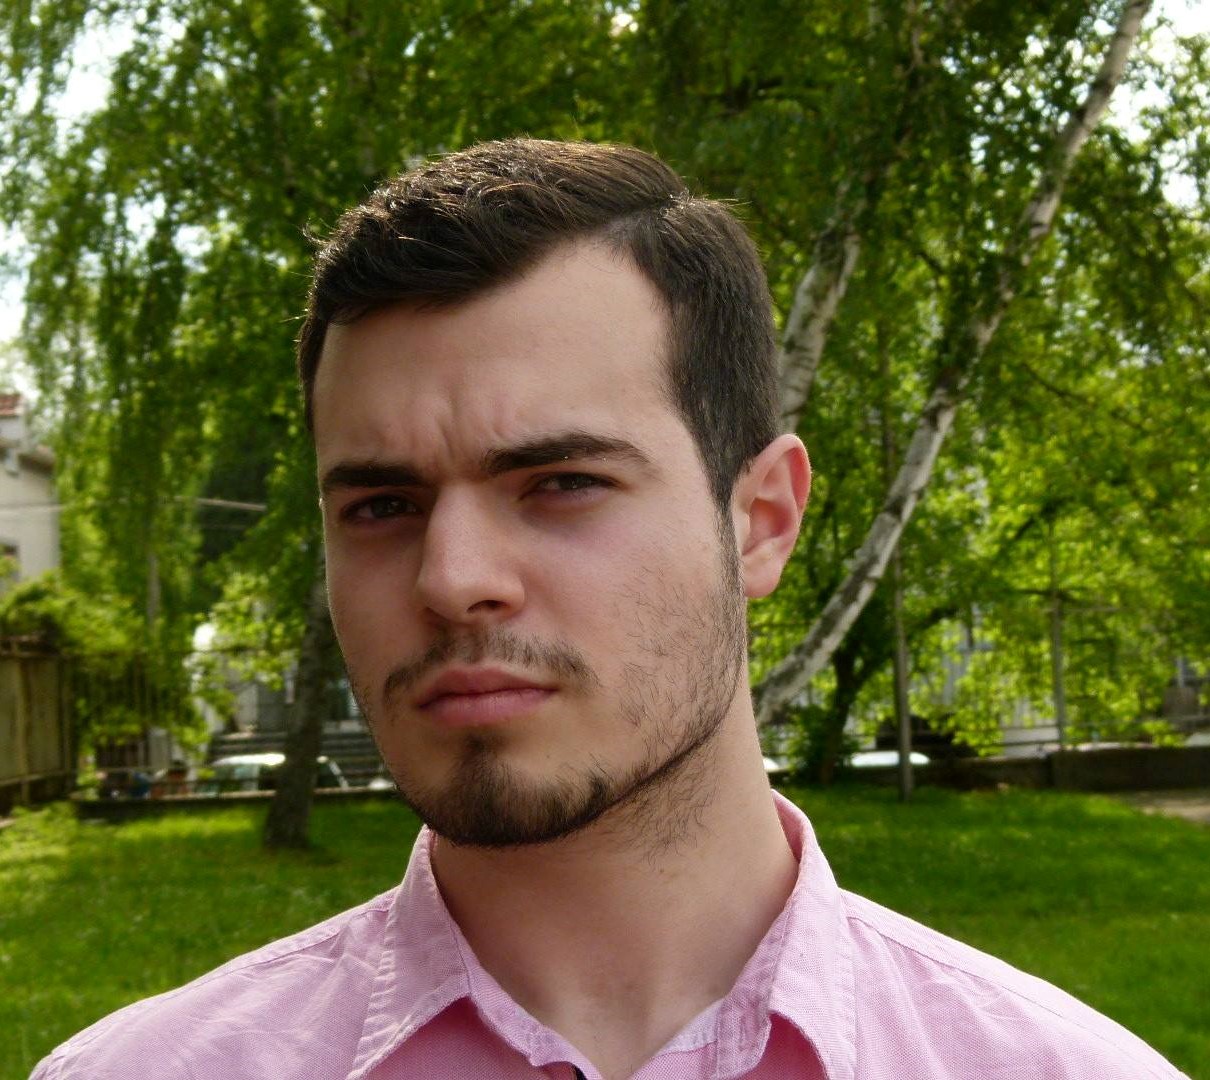 Nemanja Andjelkovic, 26, is a PhD student in Political Sciences, focusing on democratic innovations that enhance the democratic participation of citizens, especially among the youth. Photo: Courtesy of Nemanja Andjelkovic.